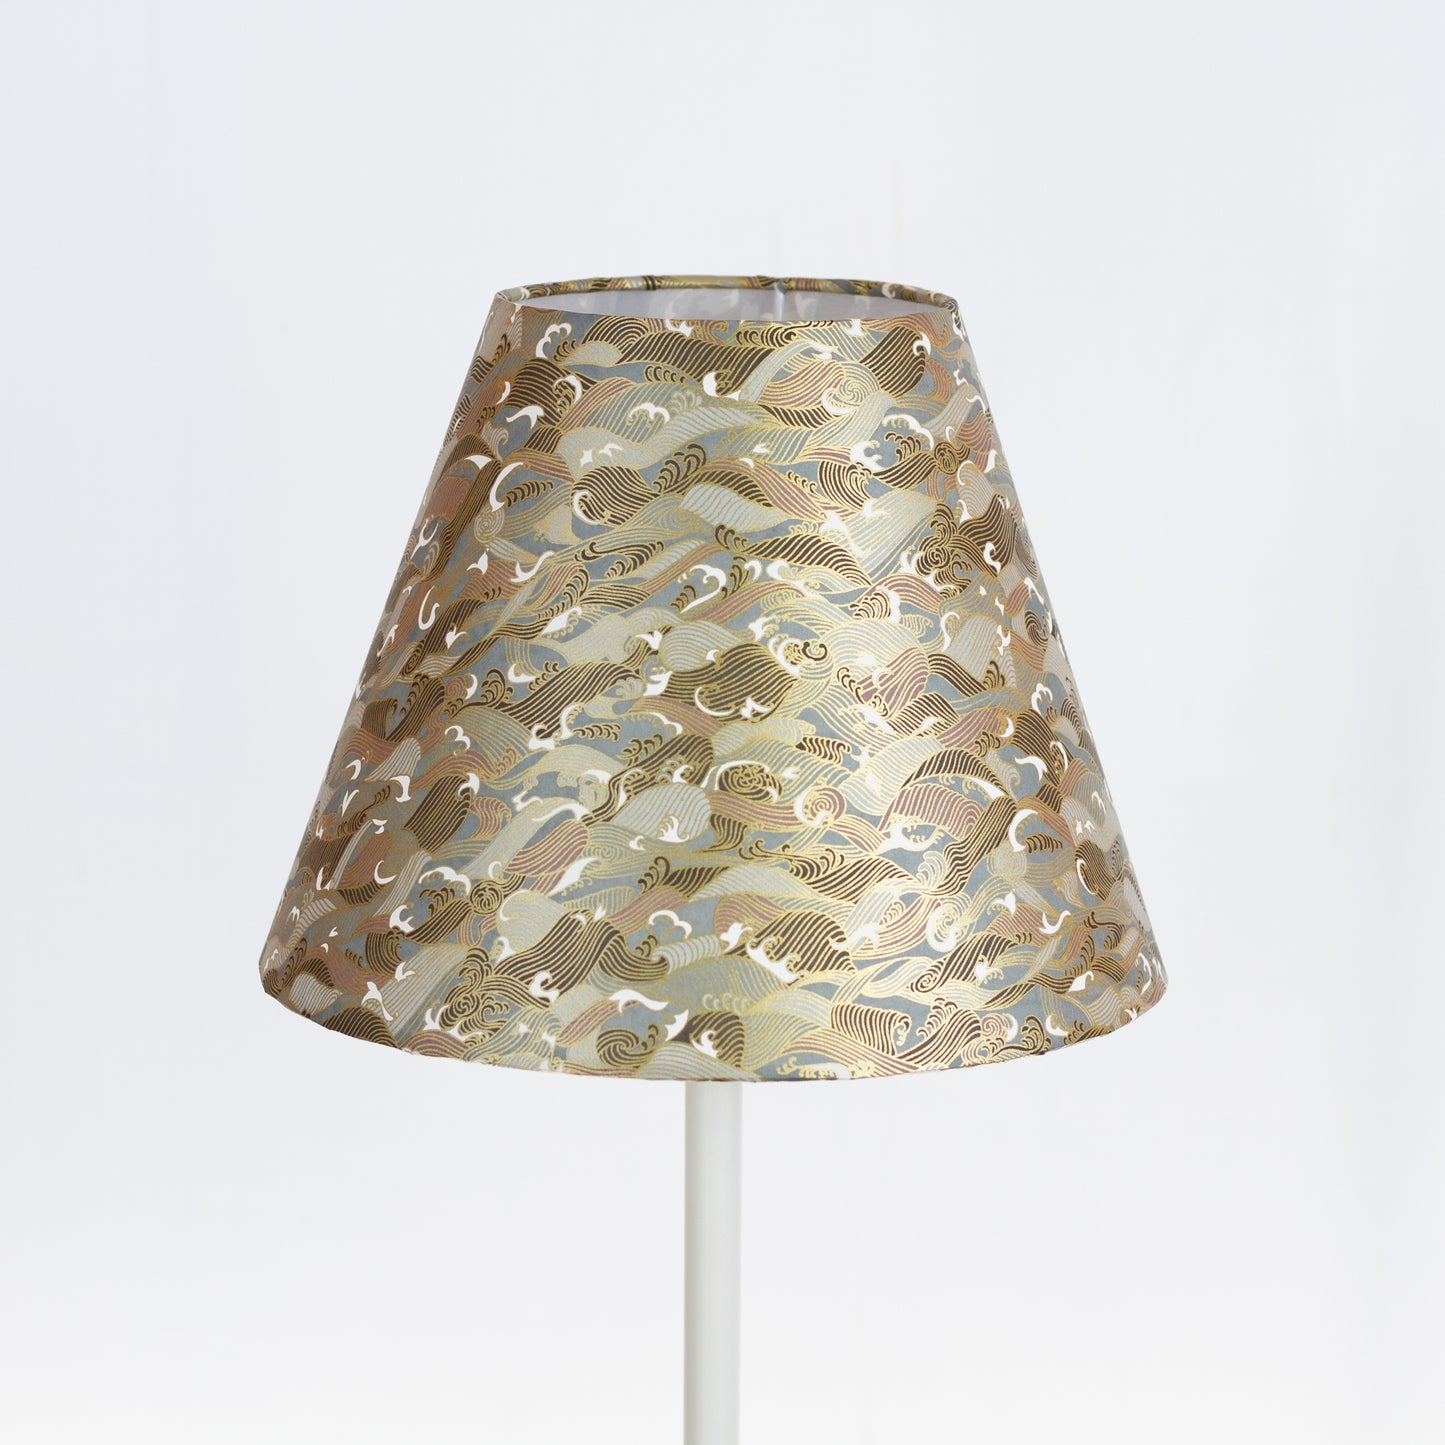 Conical Lamp Shade W03 - Gold Waves on Greys, 15cm(top) x 30cm(bottom) x 22cm(height)